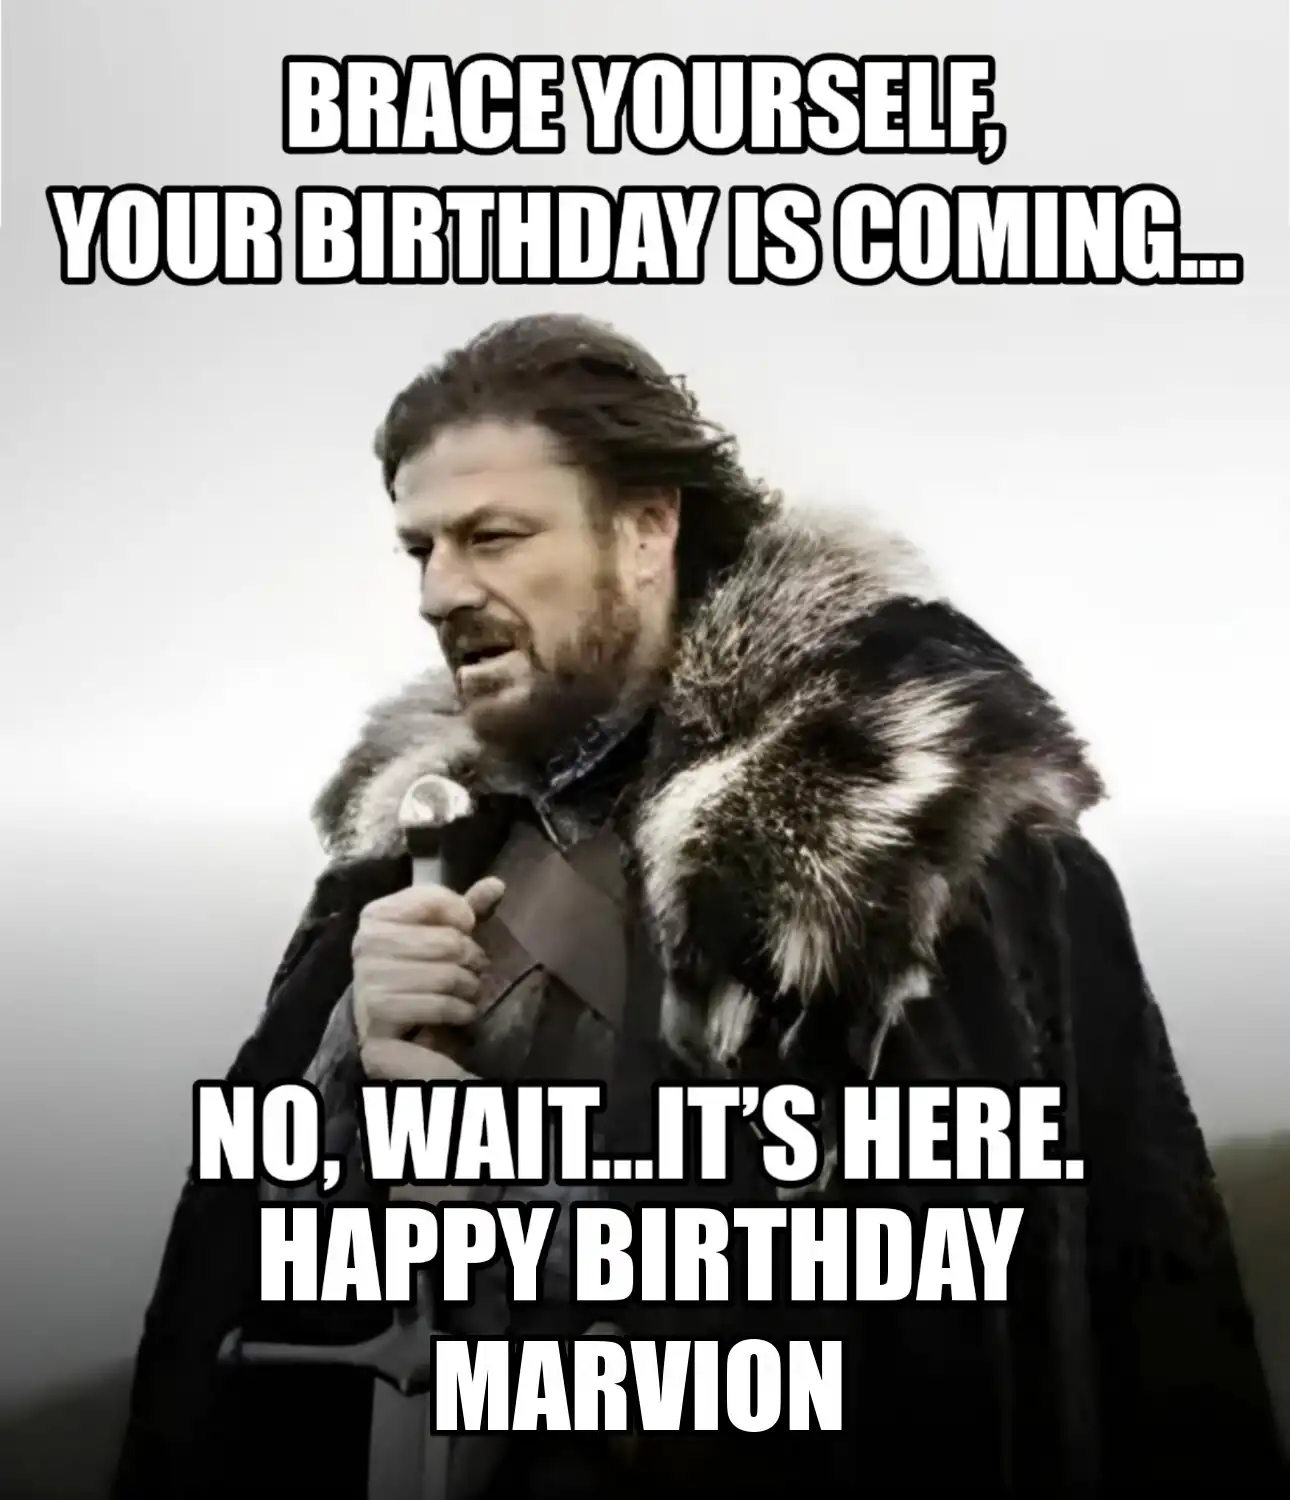 Happy Birthday Marvion Brace Yourself Your Birthday Is Coming Meme